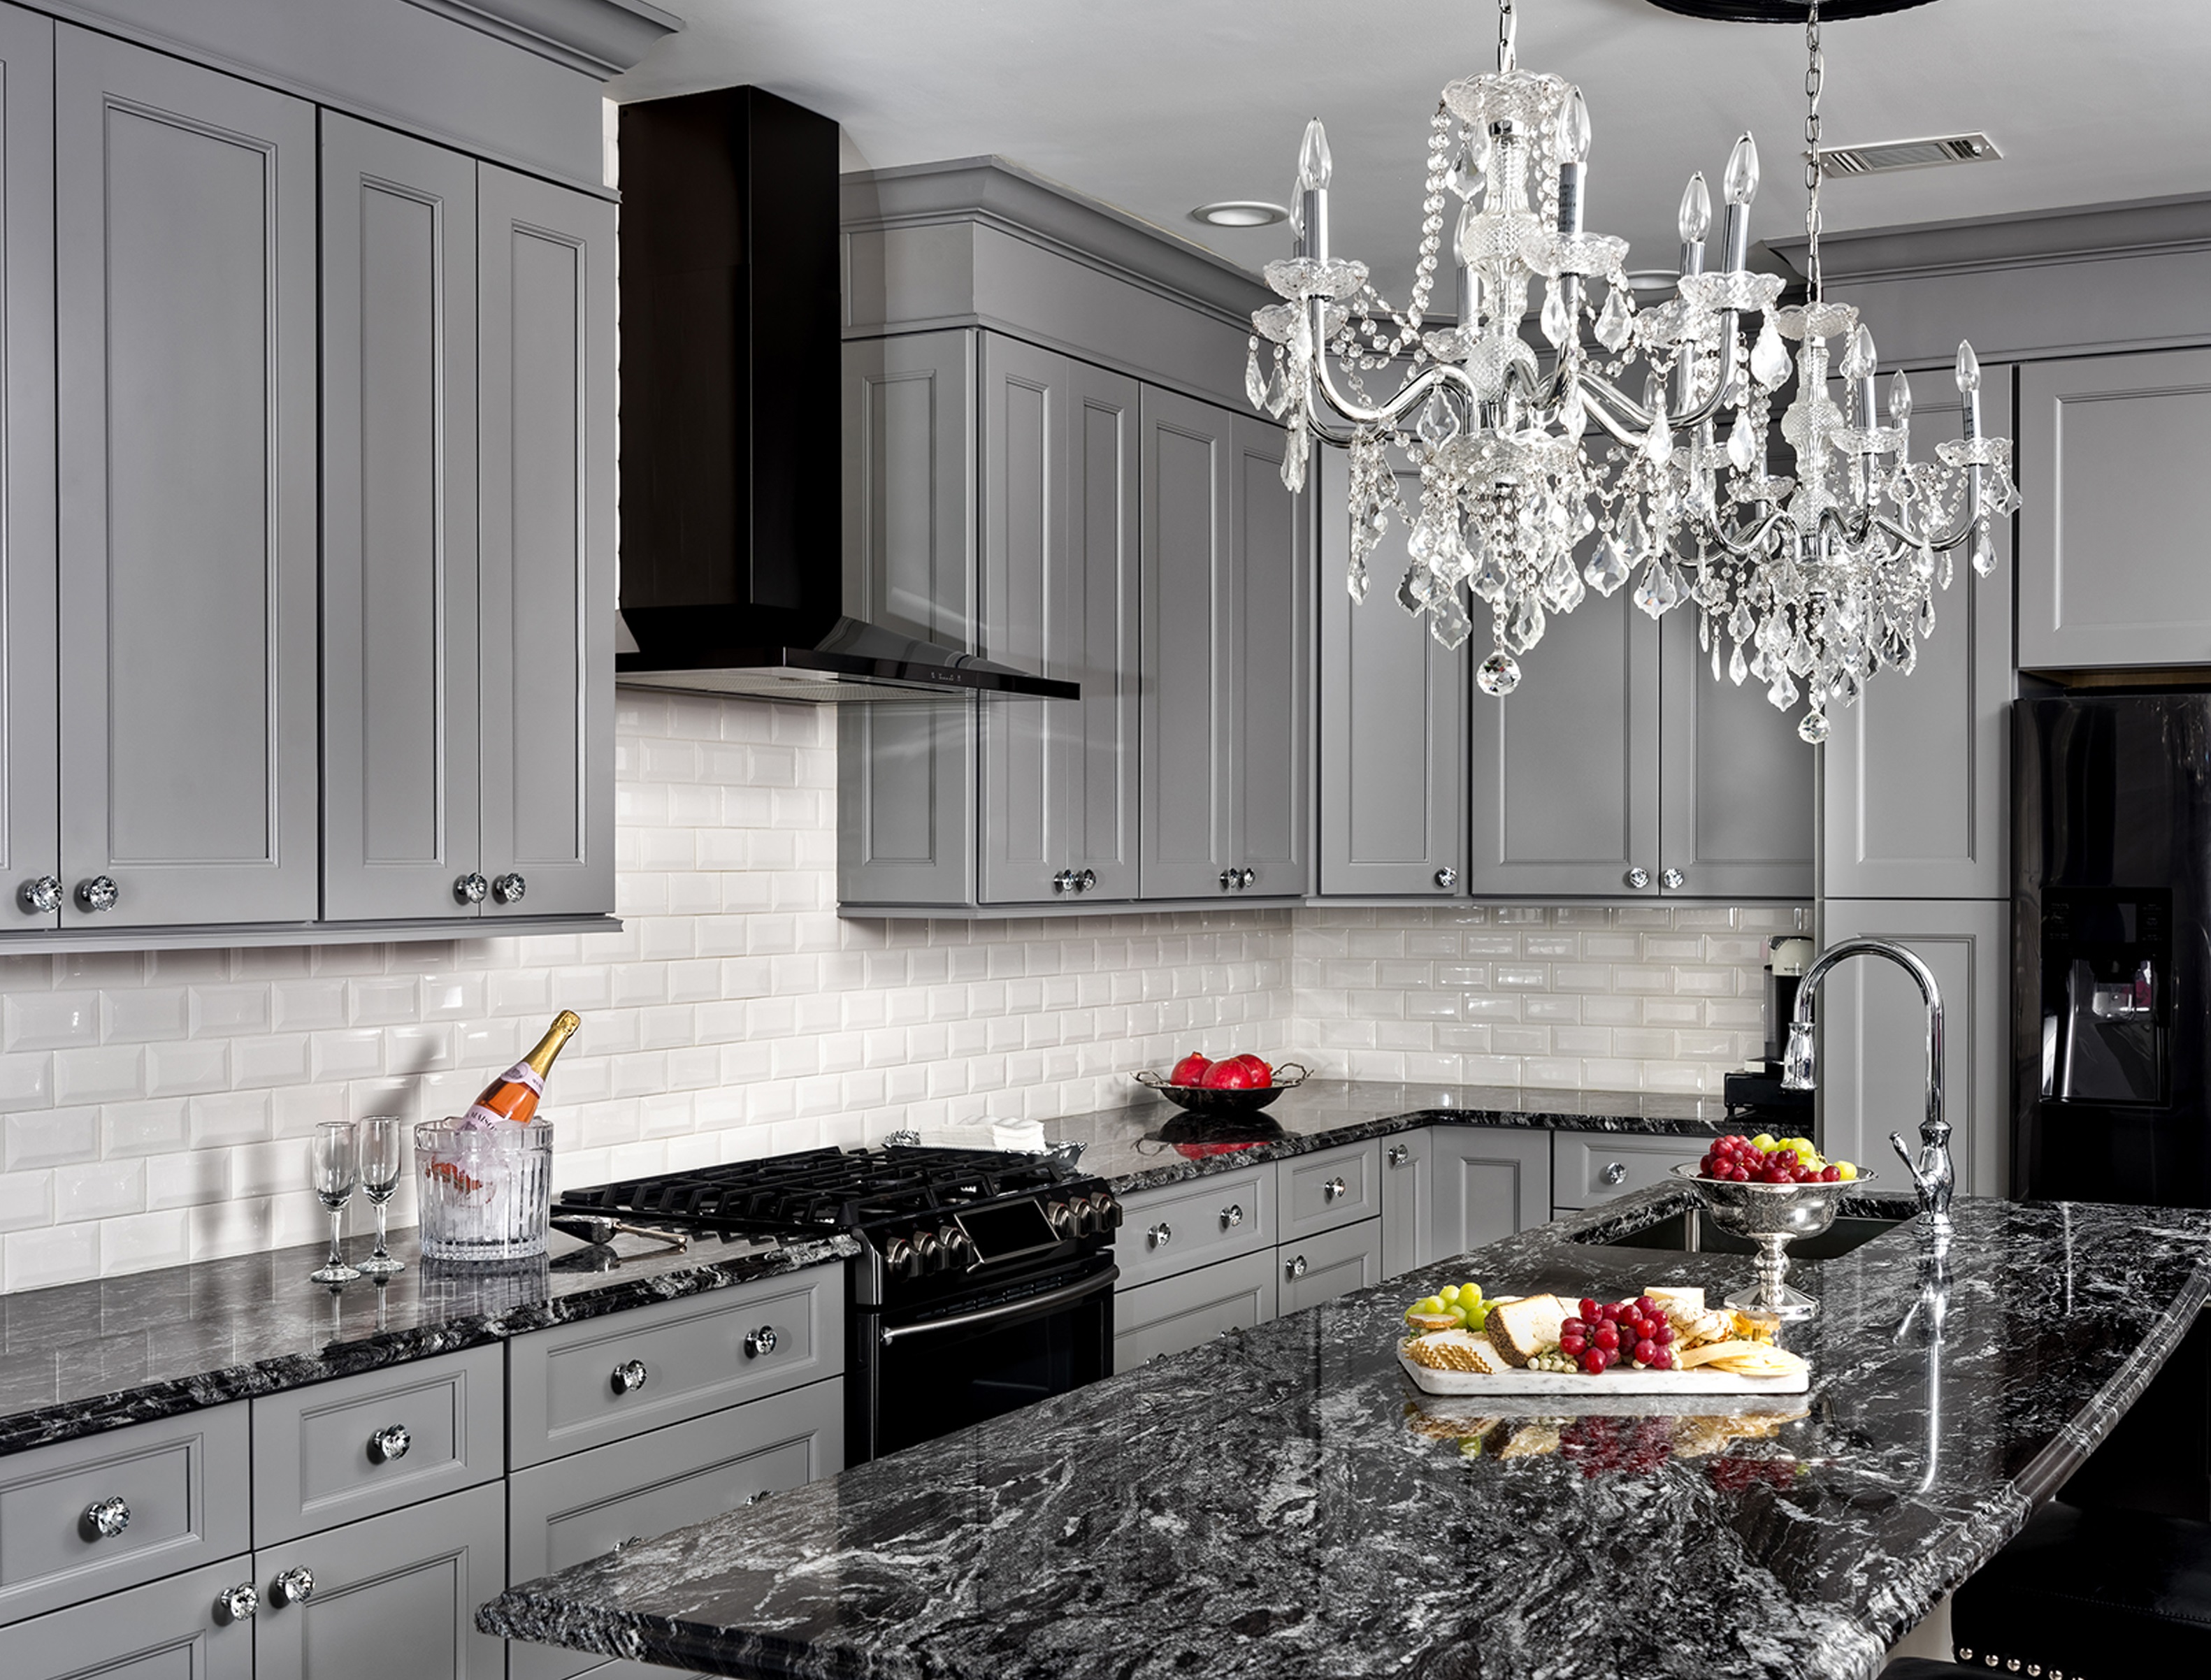  kitchen cabinets and countertops for sale